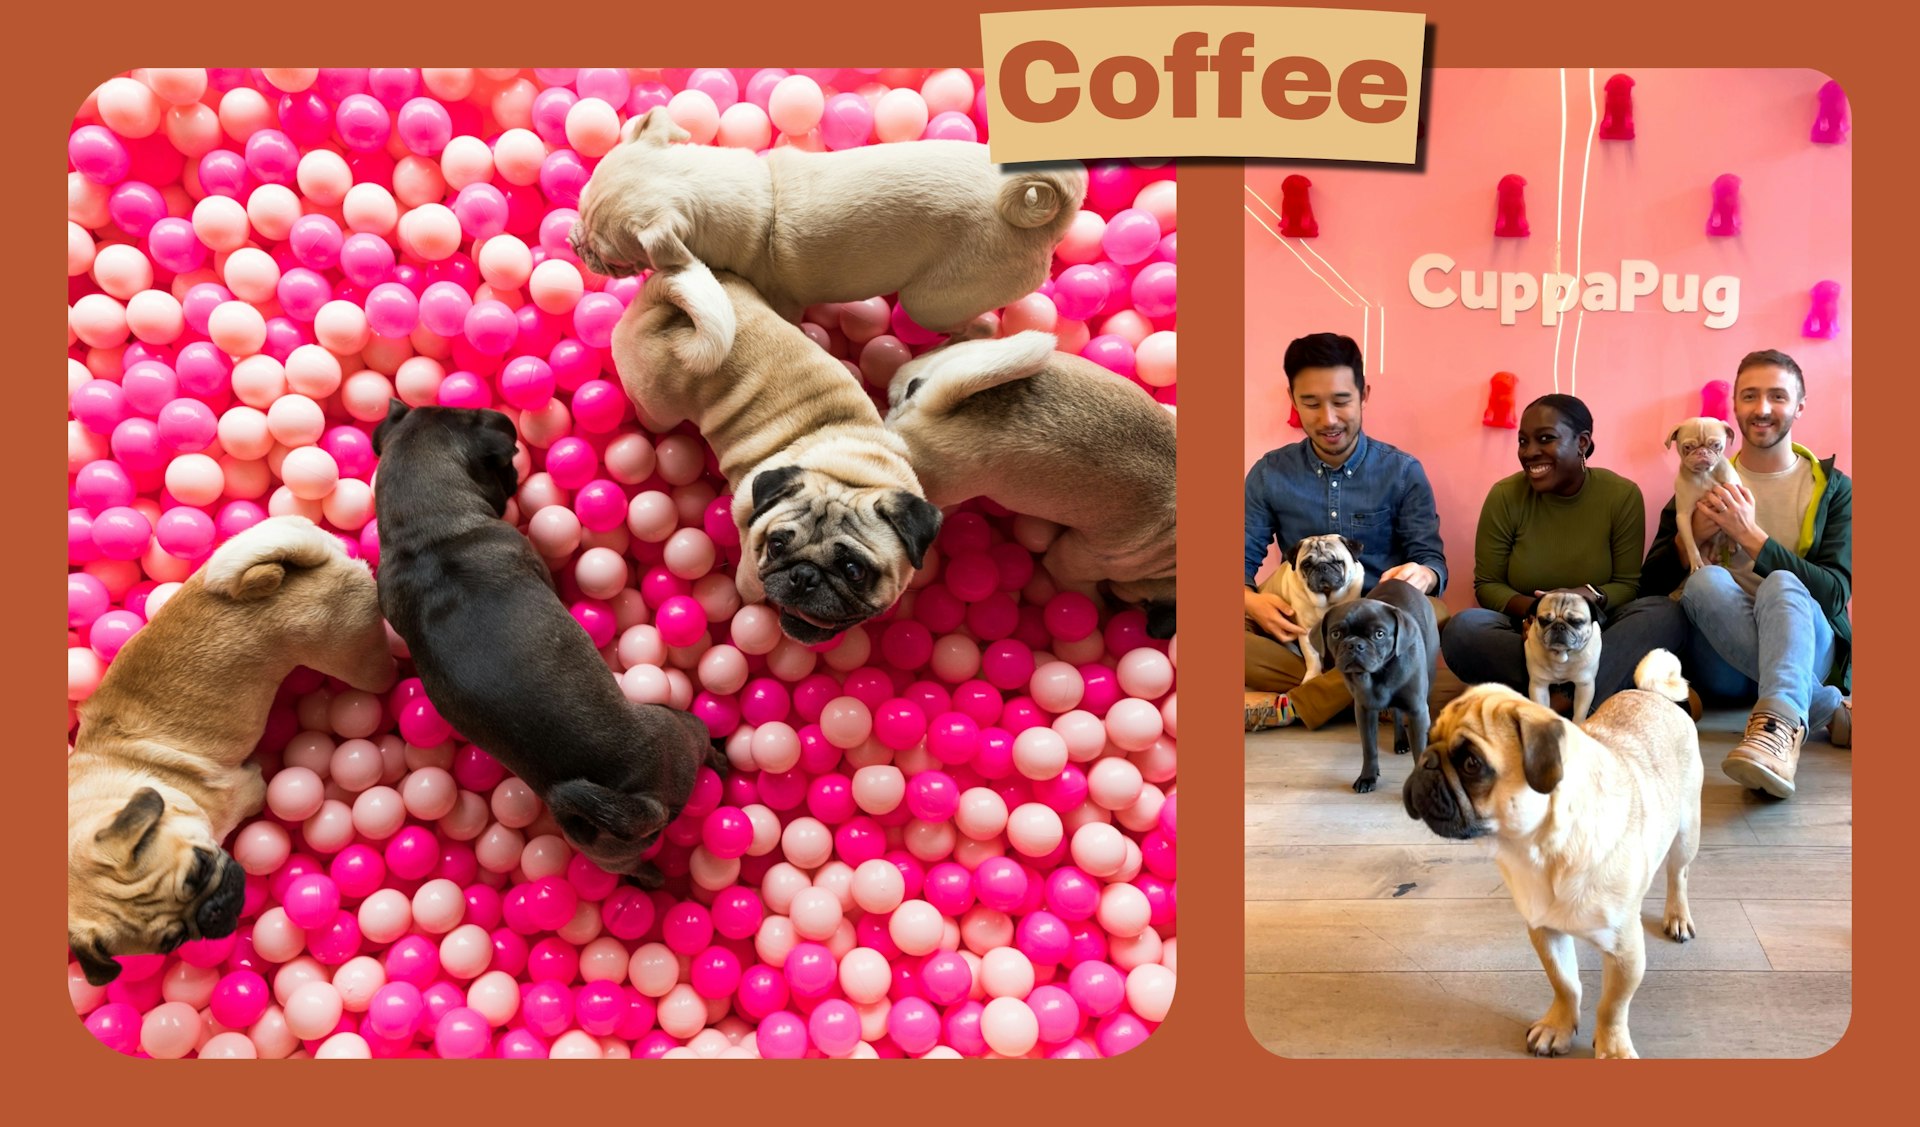 Writer James Wong and friends playing with pugs at Cuppapug, a pug-themed cafe in London